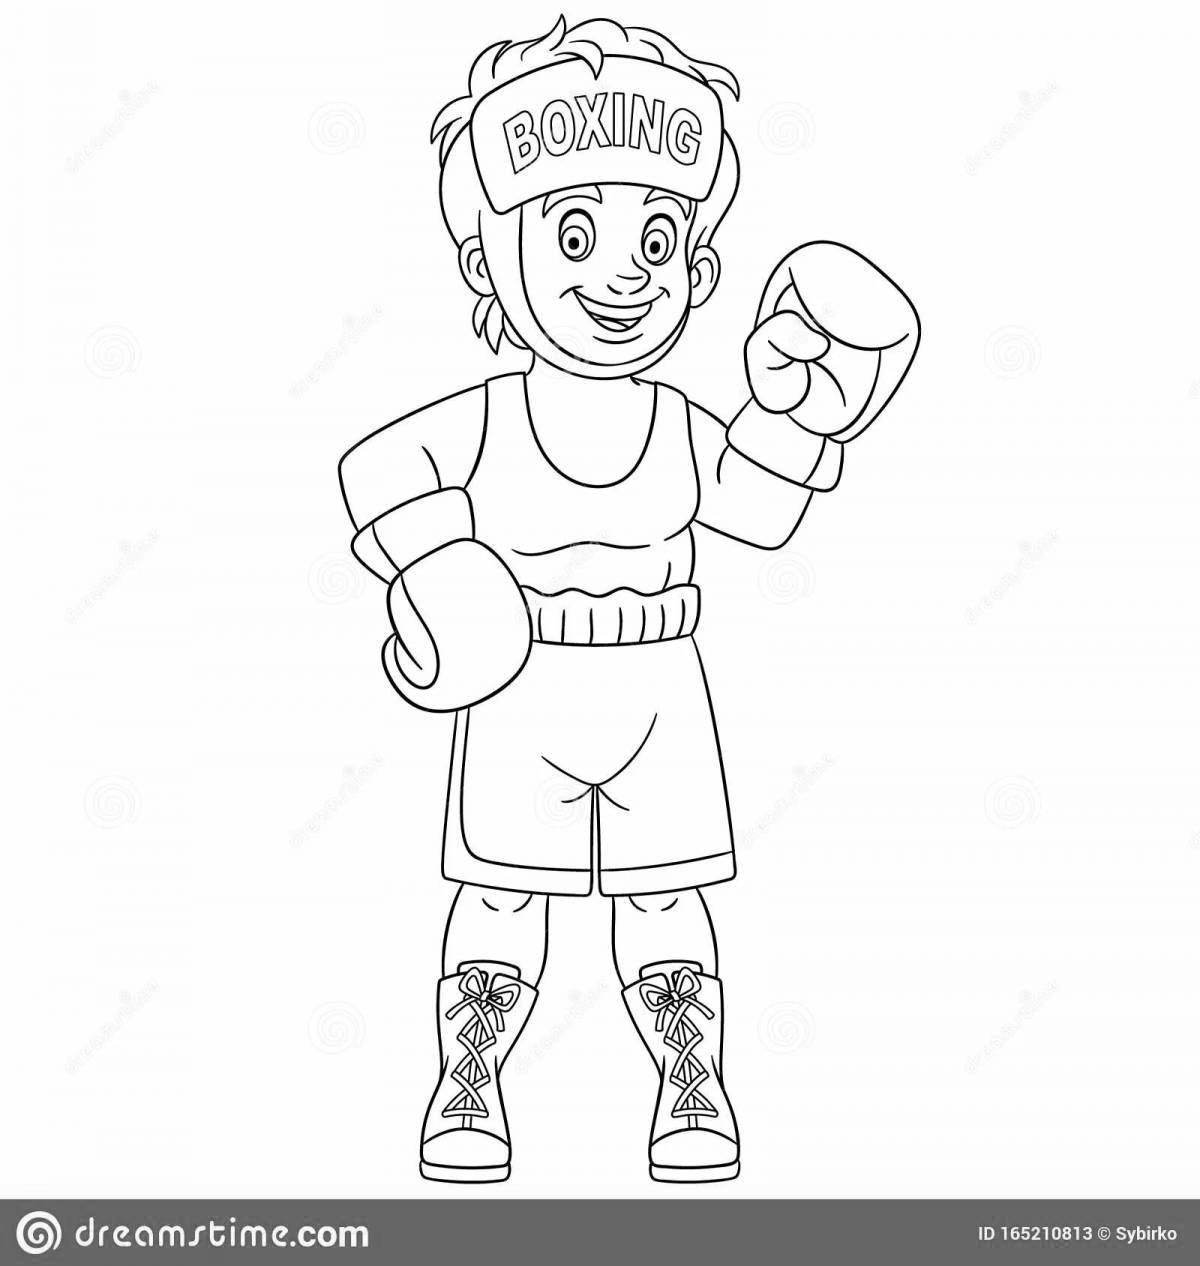 Satisfactory boxing coloring page for kids